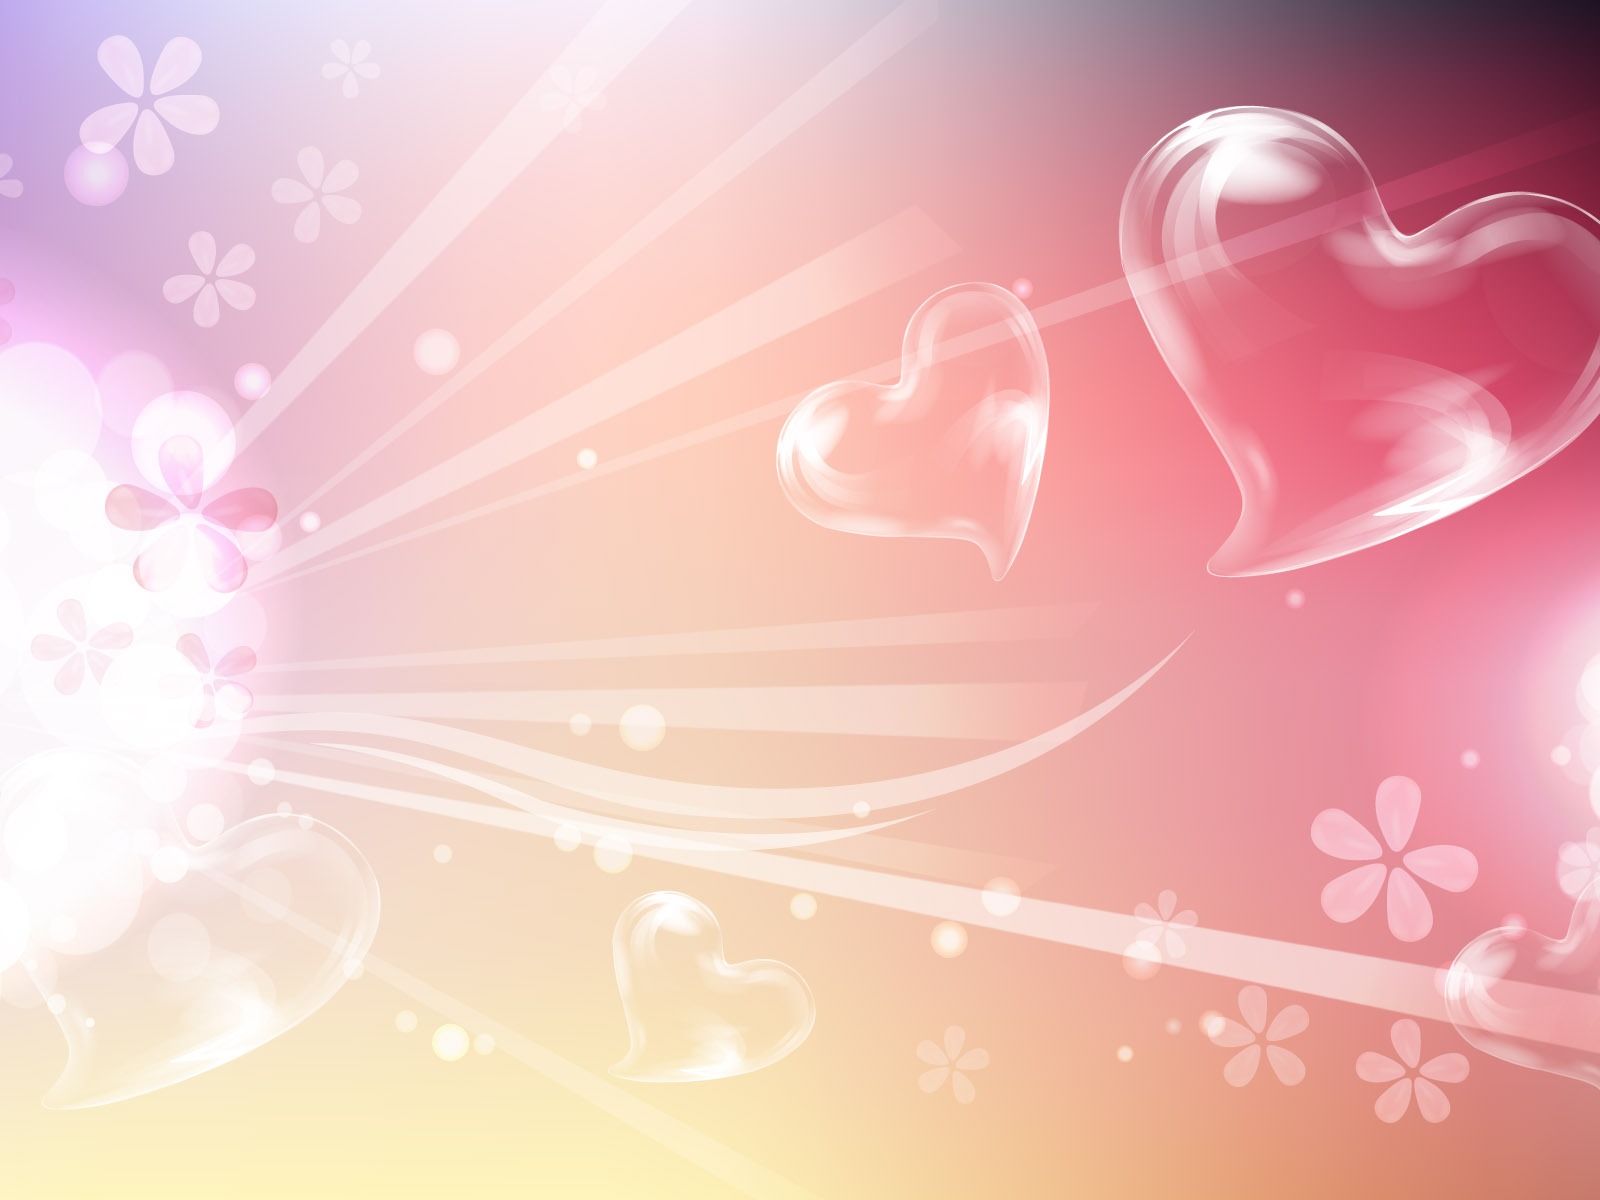 Valentine's Day Love Theme Wallpapers (2) #3 - 1600x1200